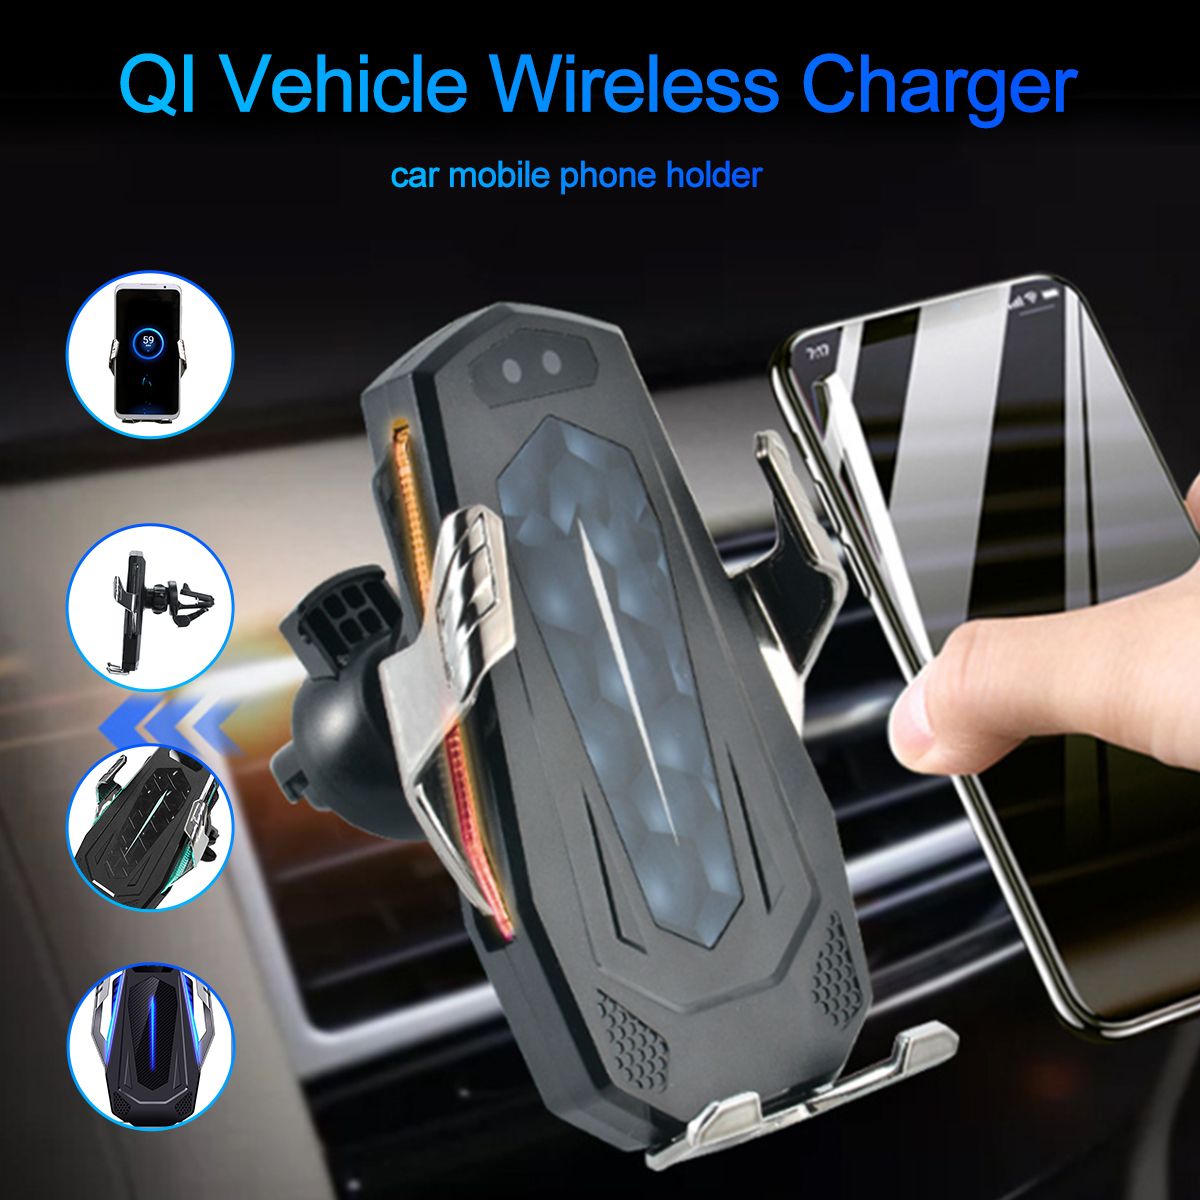 QI-Wireless-Fast-Car-Charger-10W-Vehicle-Charger-Car-Phone-Holder-Black-1591893